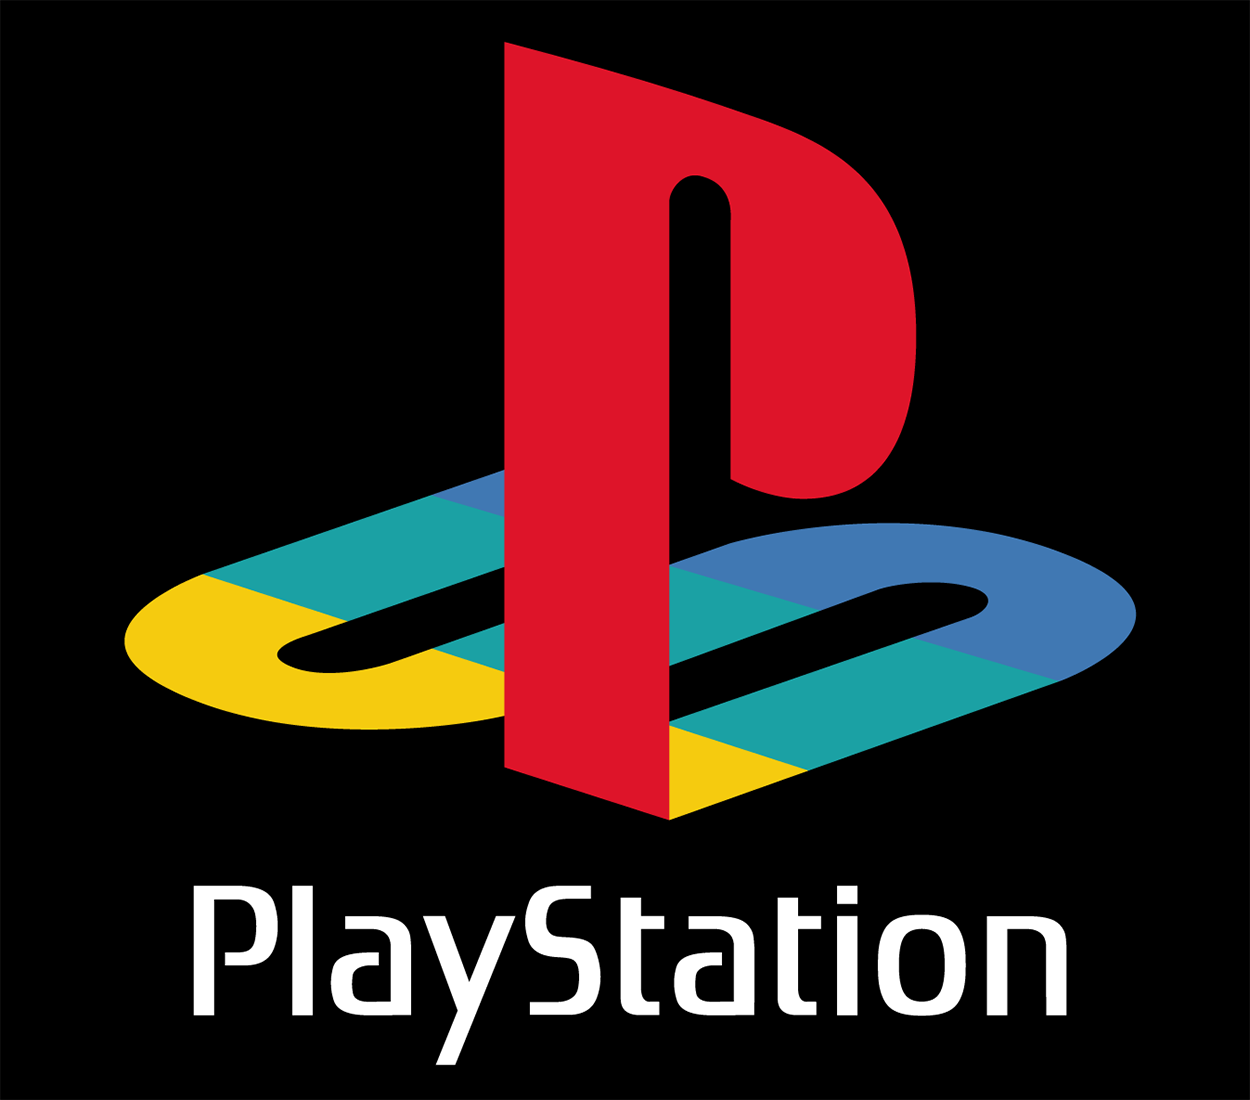 PlayStation Logo, PlayStation Symbol, Meaning, History and Evolution